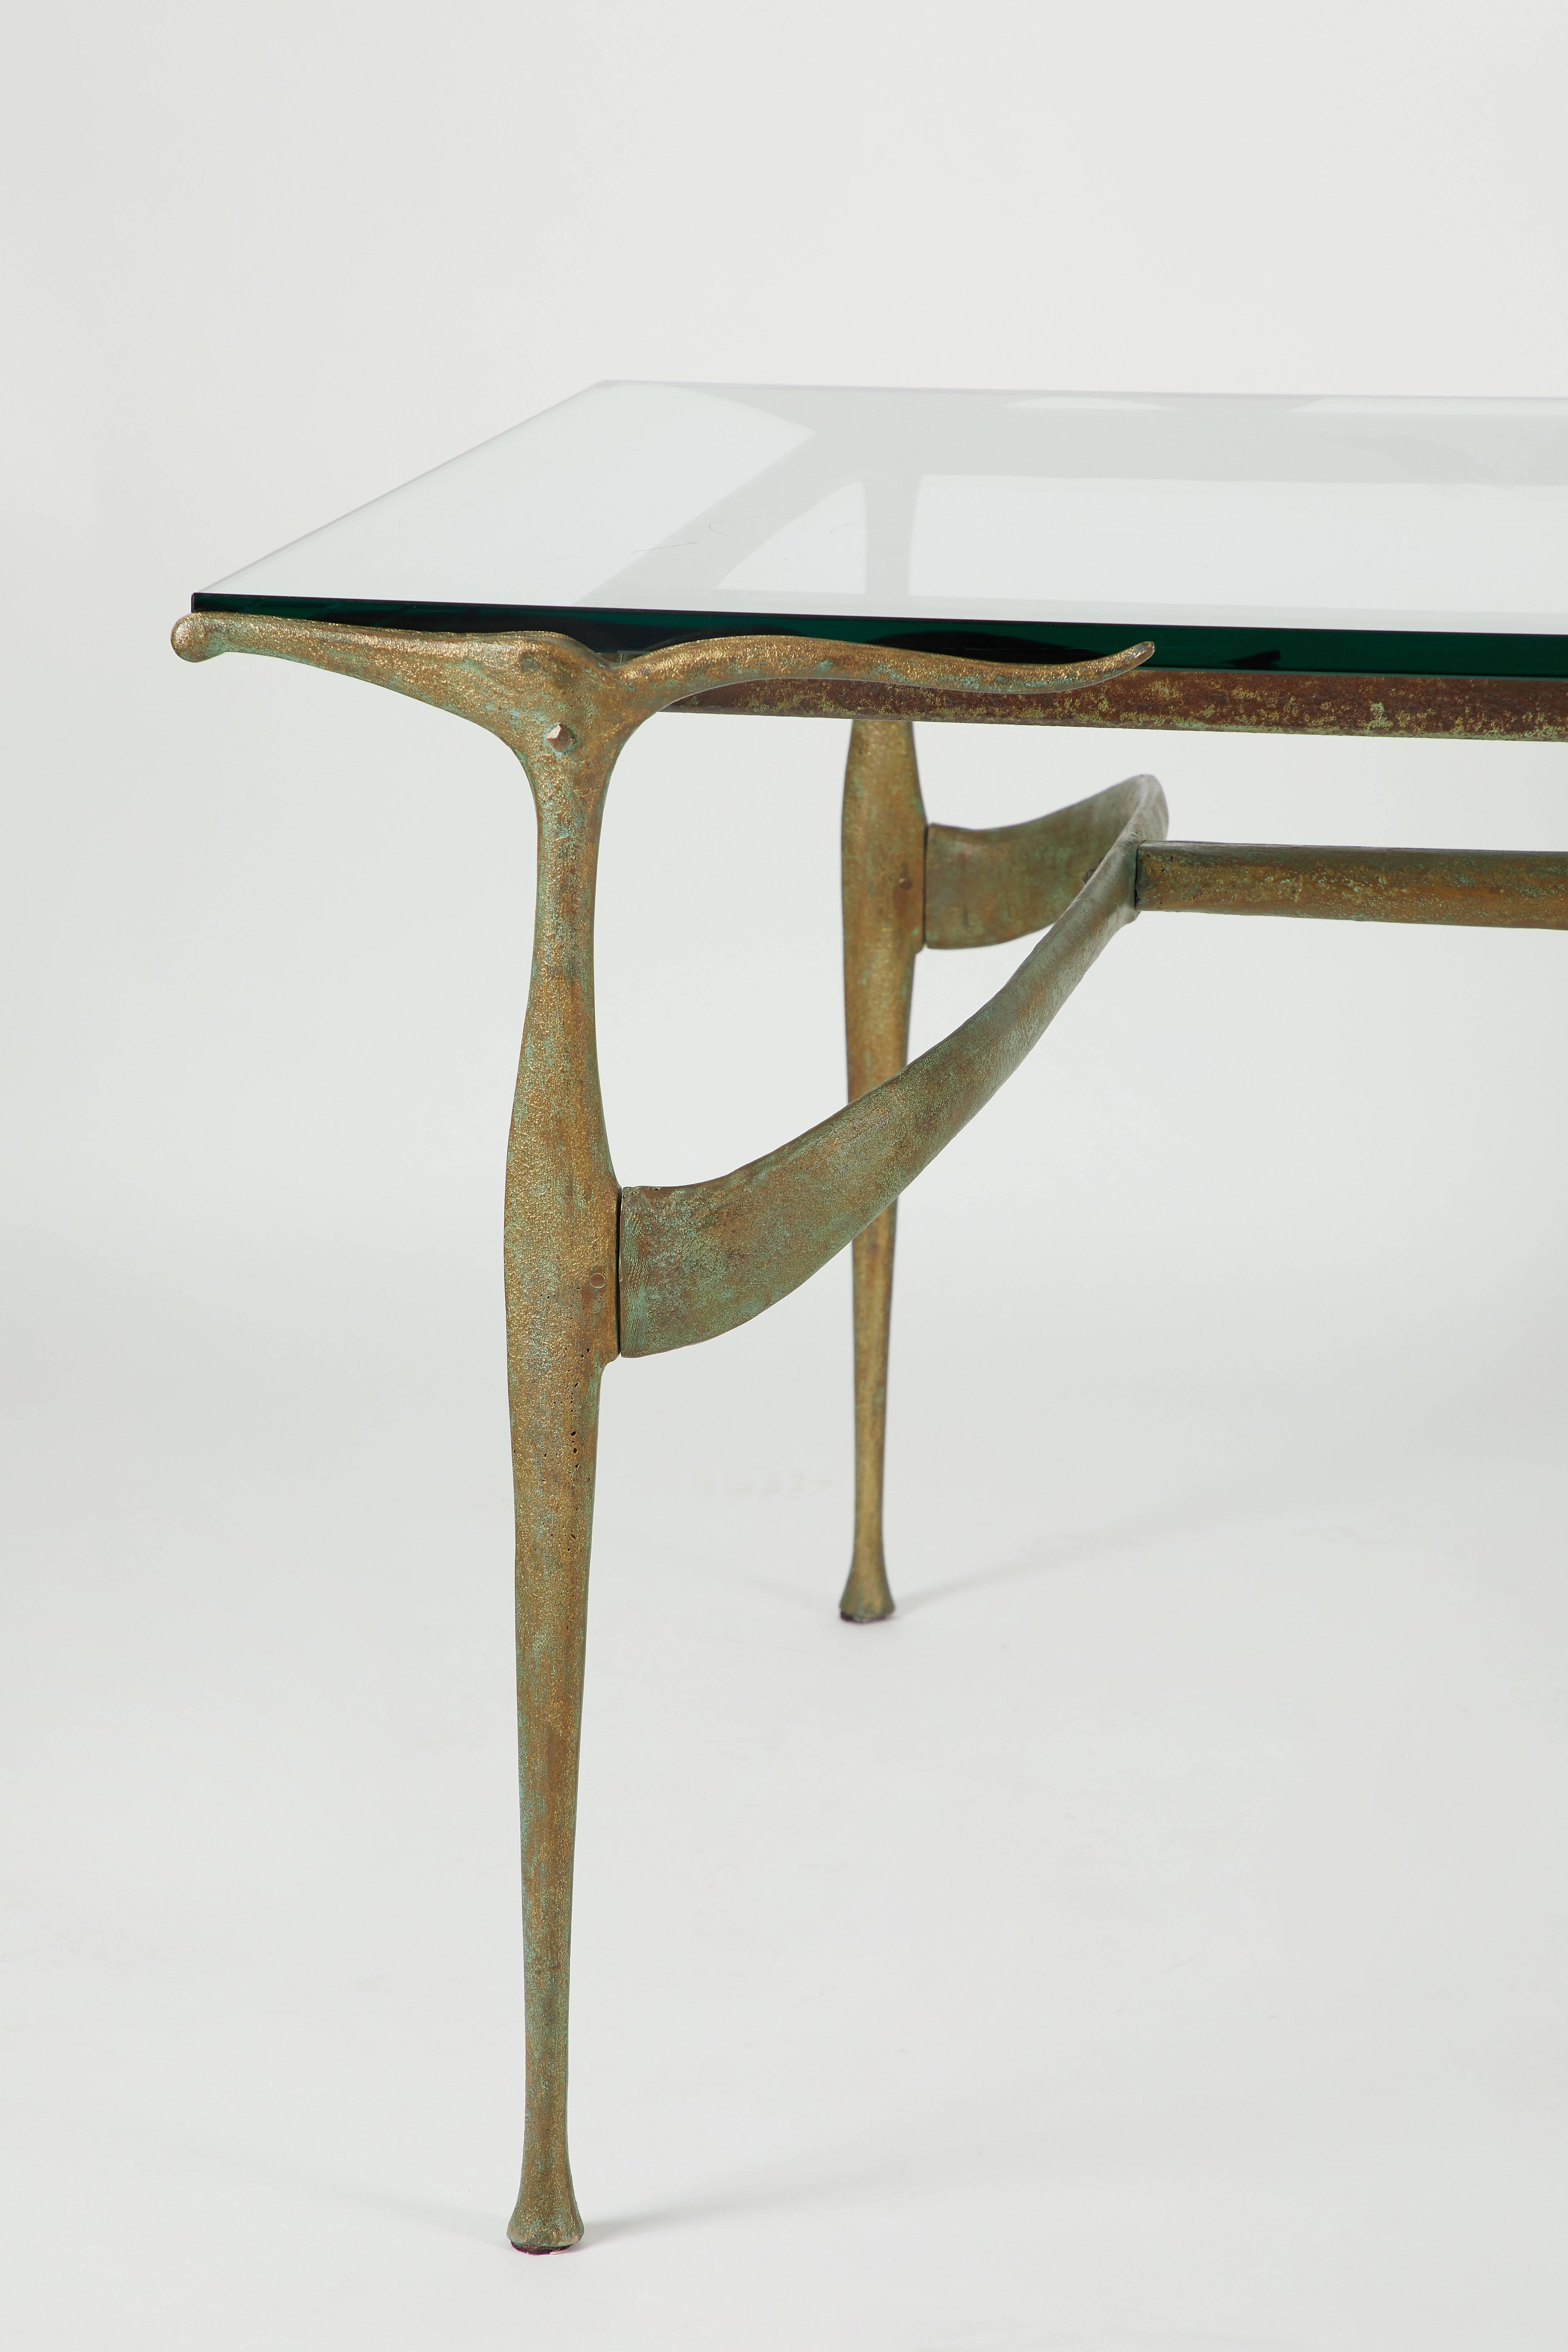 Iconic sculptural dining table designed by Don Johnson Studio, 1956. New glass top. A matching set of eight Gazelle dining chairs also available.